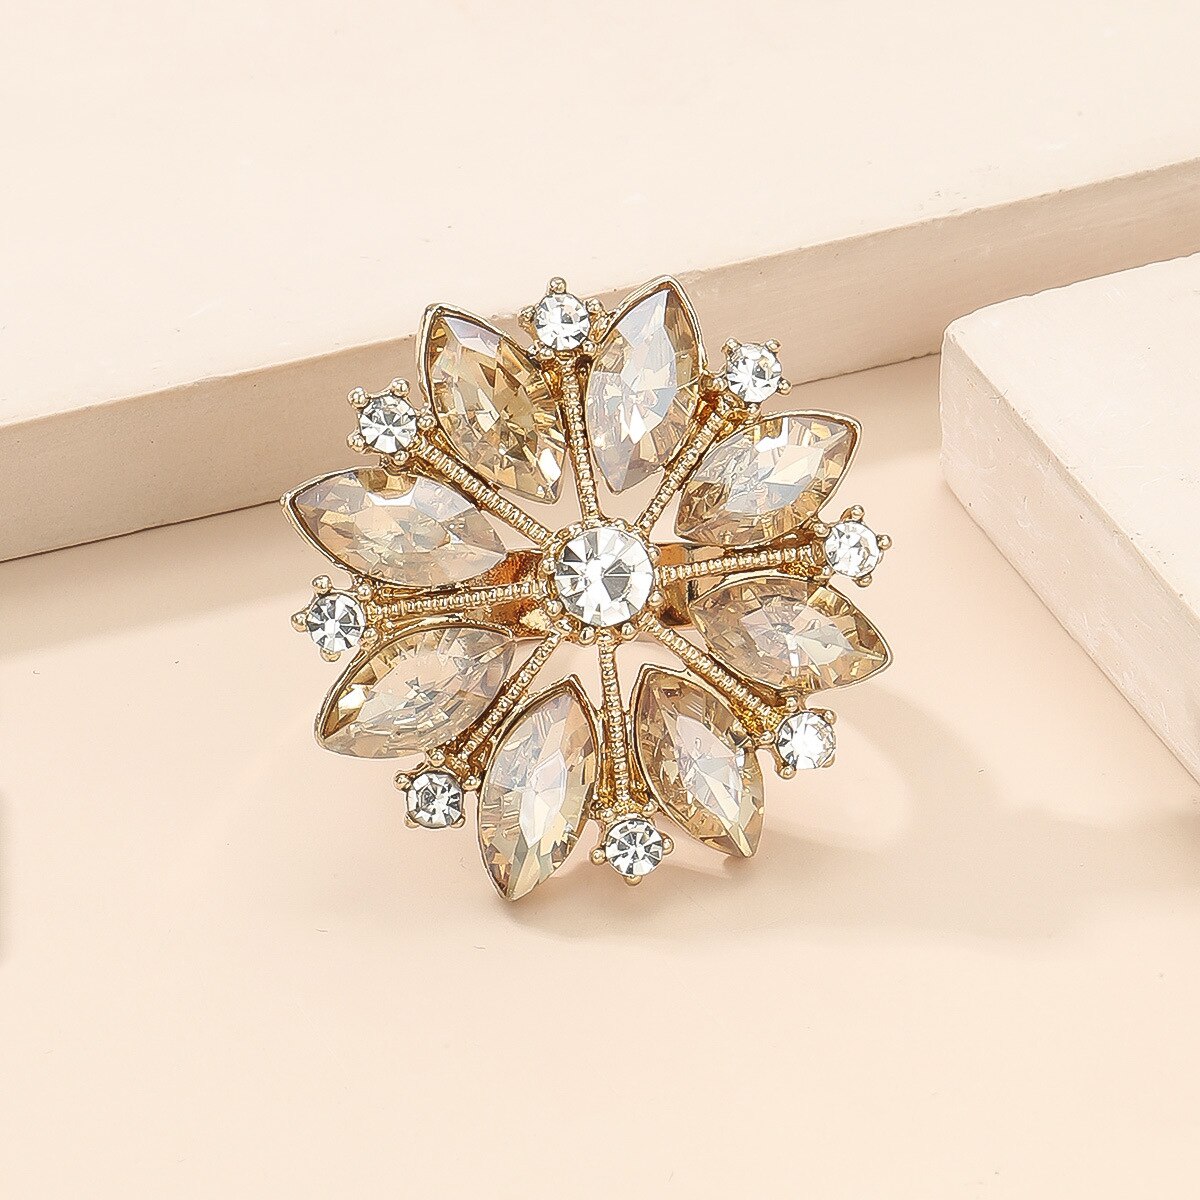 Luxury-Zircon-Rings-Indian-Jewelry-Female-Stylish-Retro-Flower-Gold-Color-Alloy-Open-Finger-Ring-For-1005004753617048-4